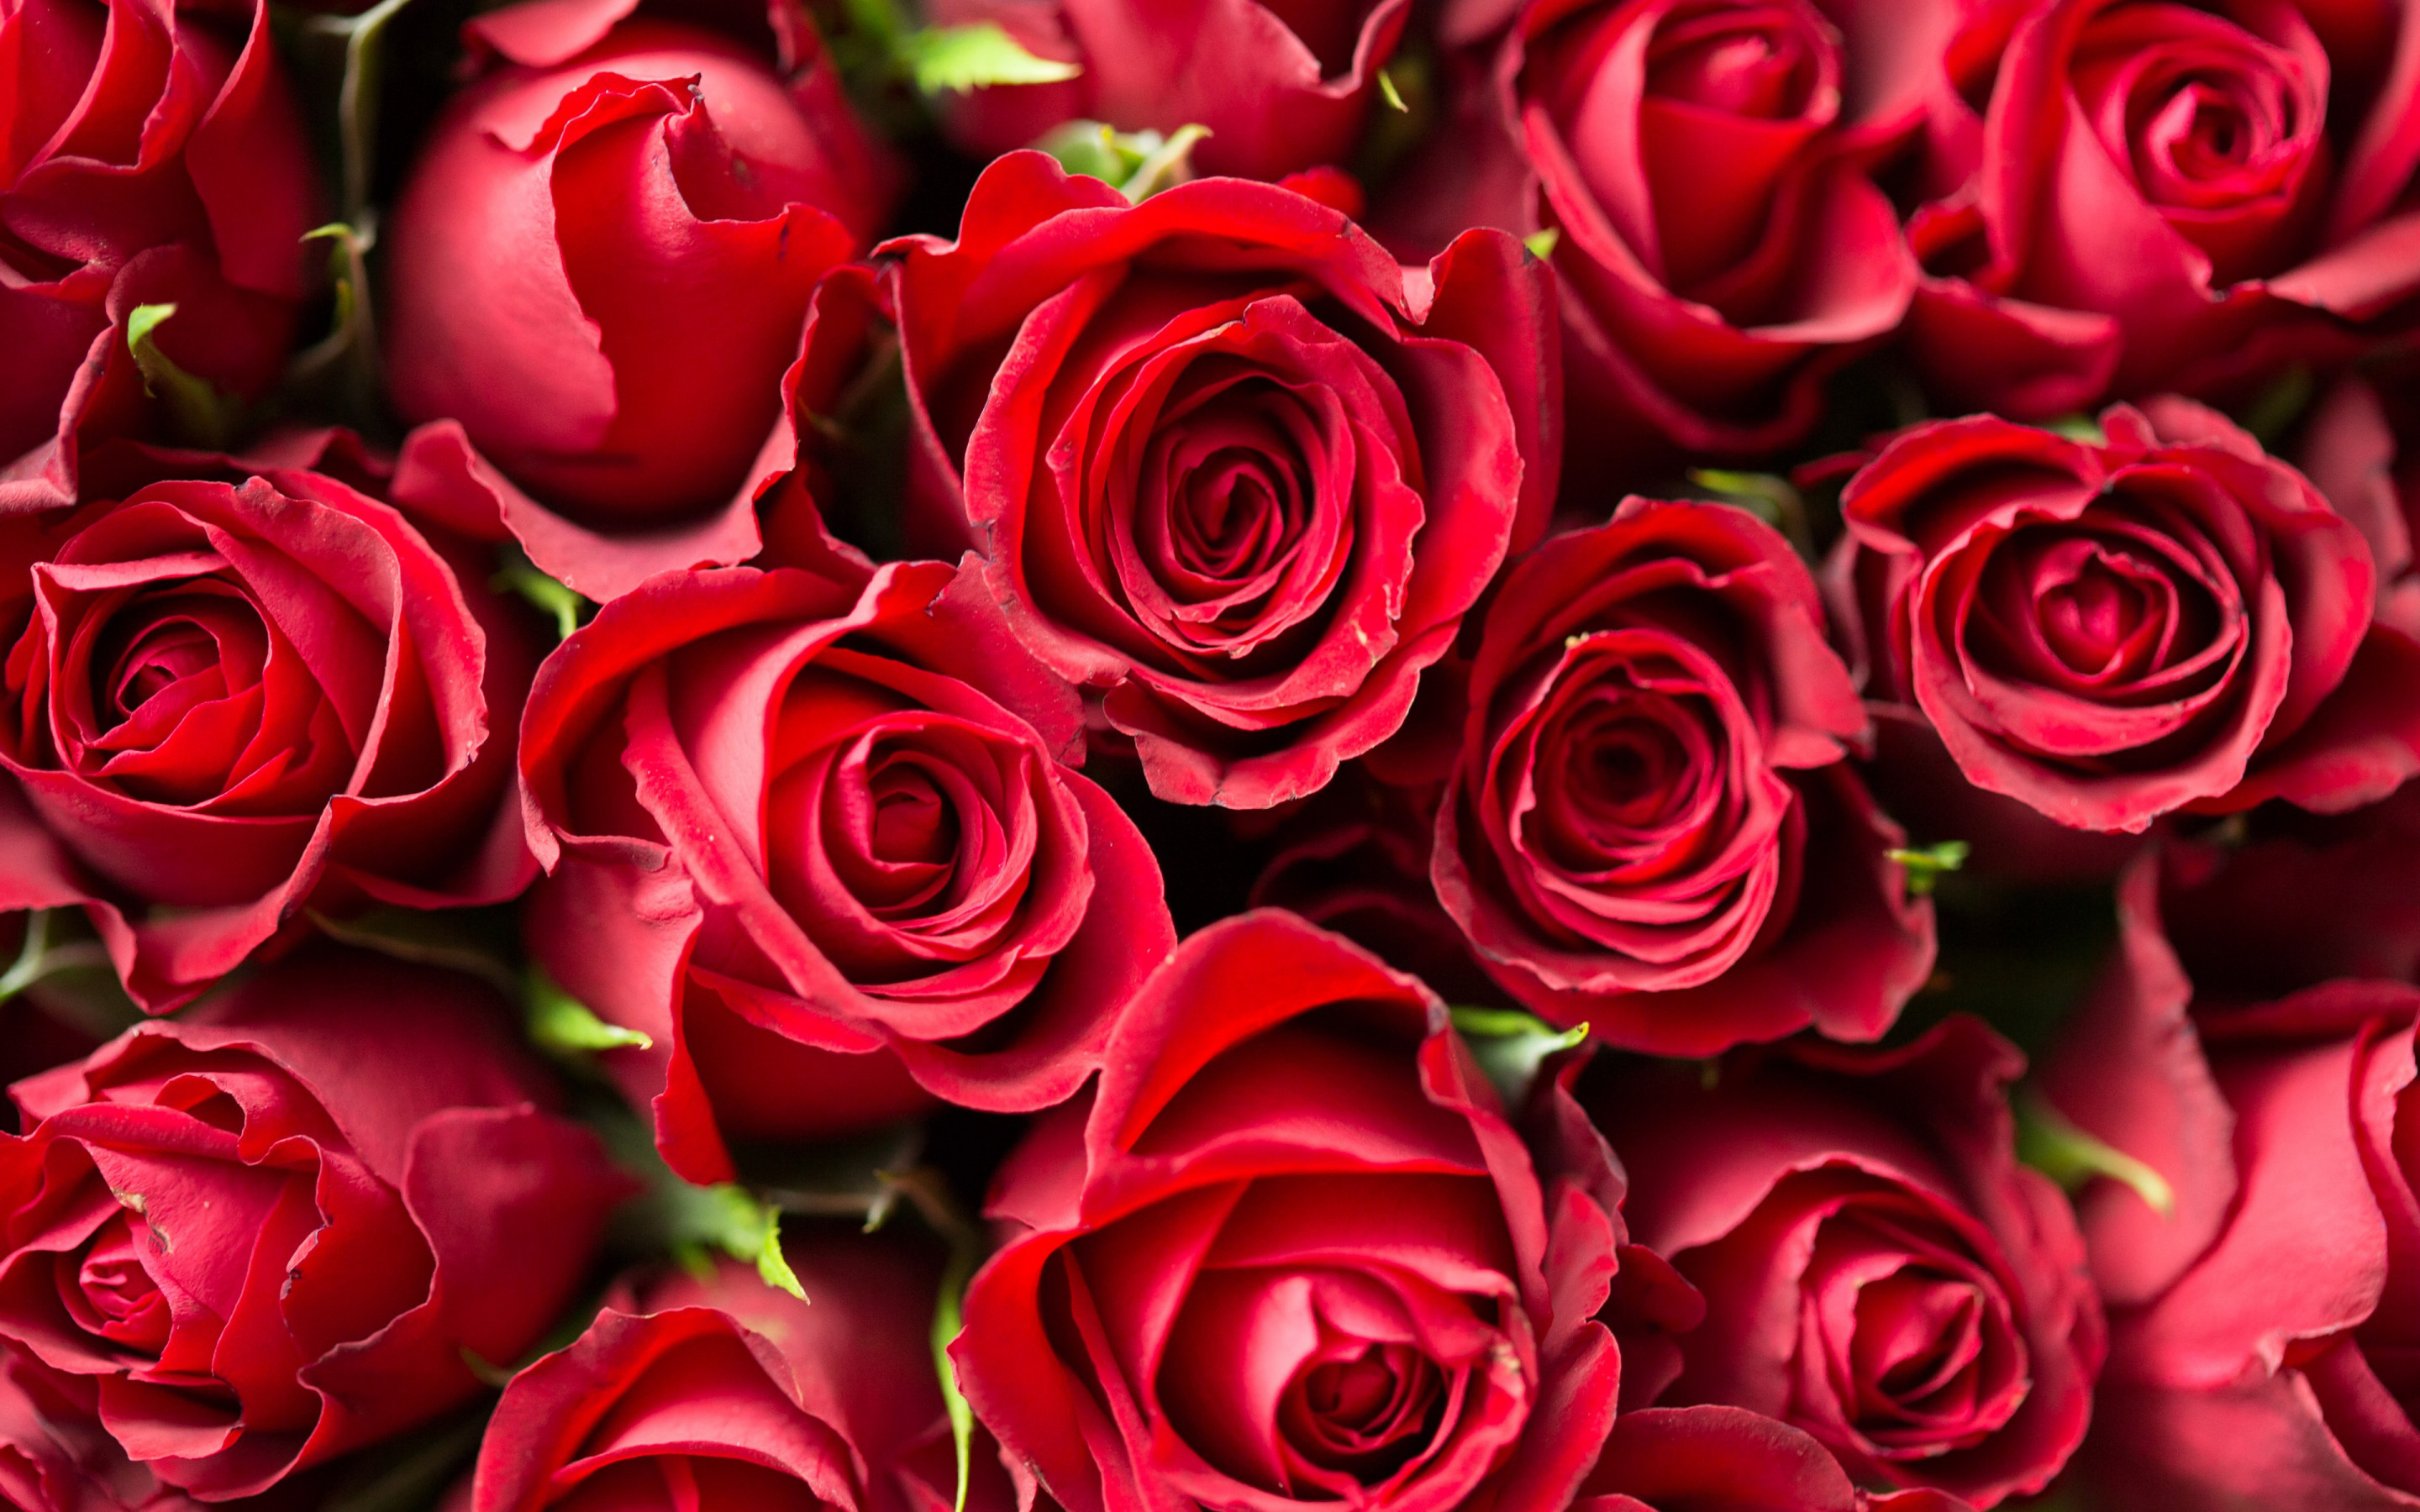 Lots of red roses wallpaper 2880x1800